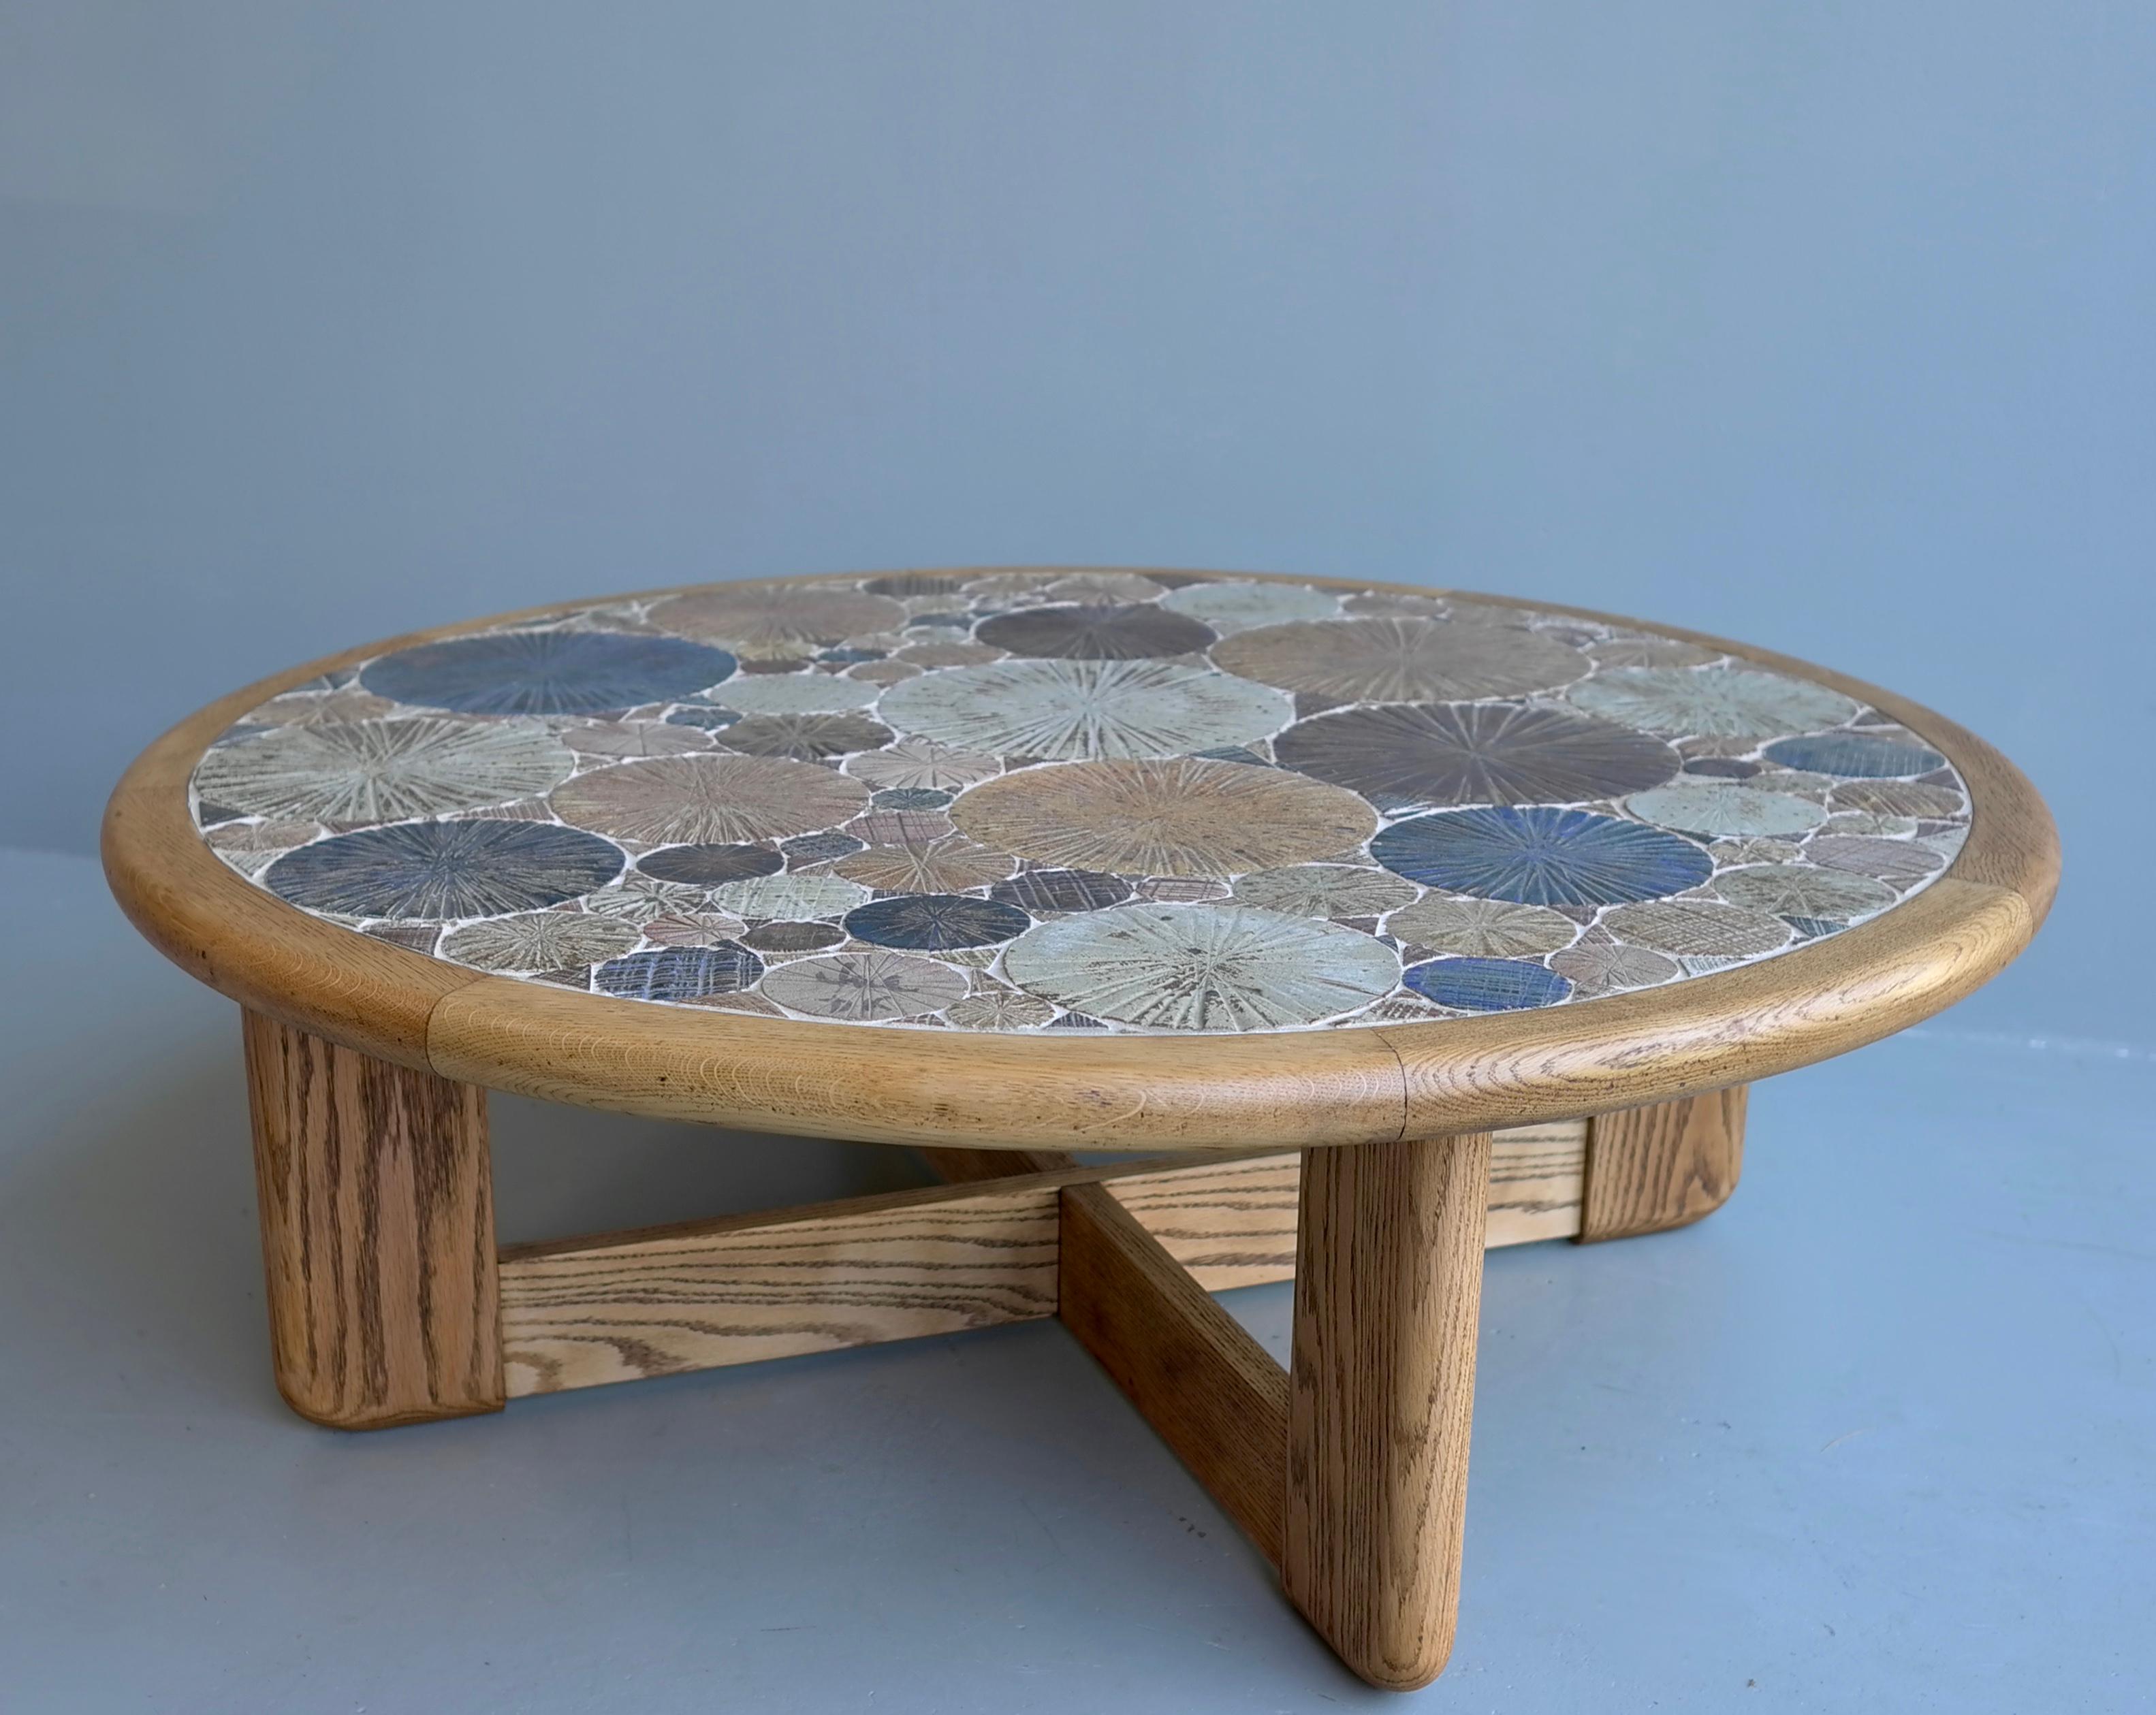 Tue Poulsen round ceramic and oak coffee table
Haslev Møbelsnedkeri A/S, Denmark, 1963
Multi-color textured tiles were handmade by the Danish artist.
Signed by the artist Tue DK.